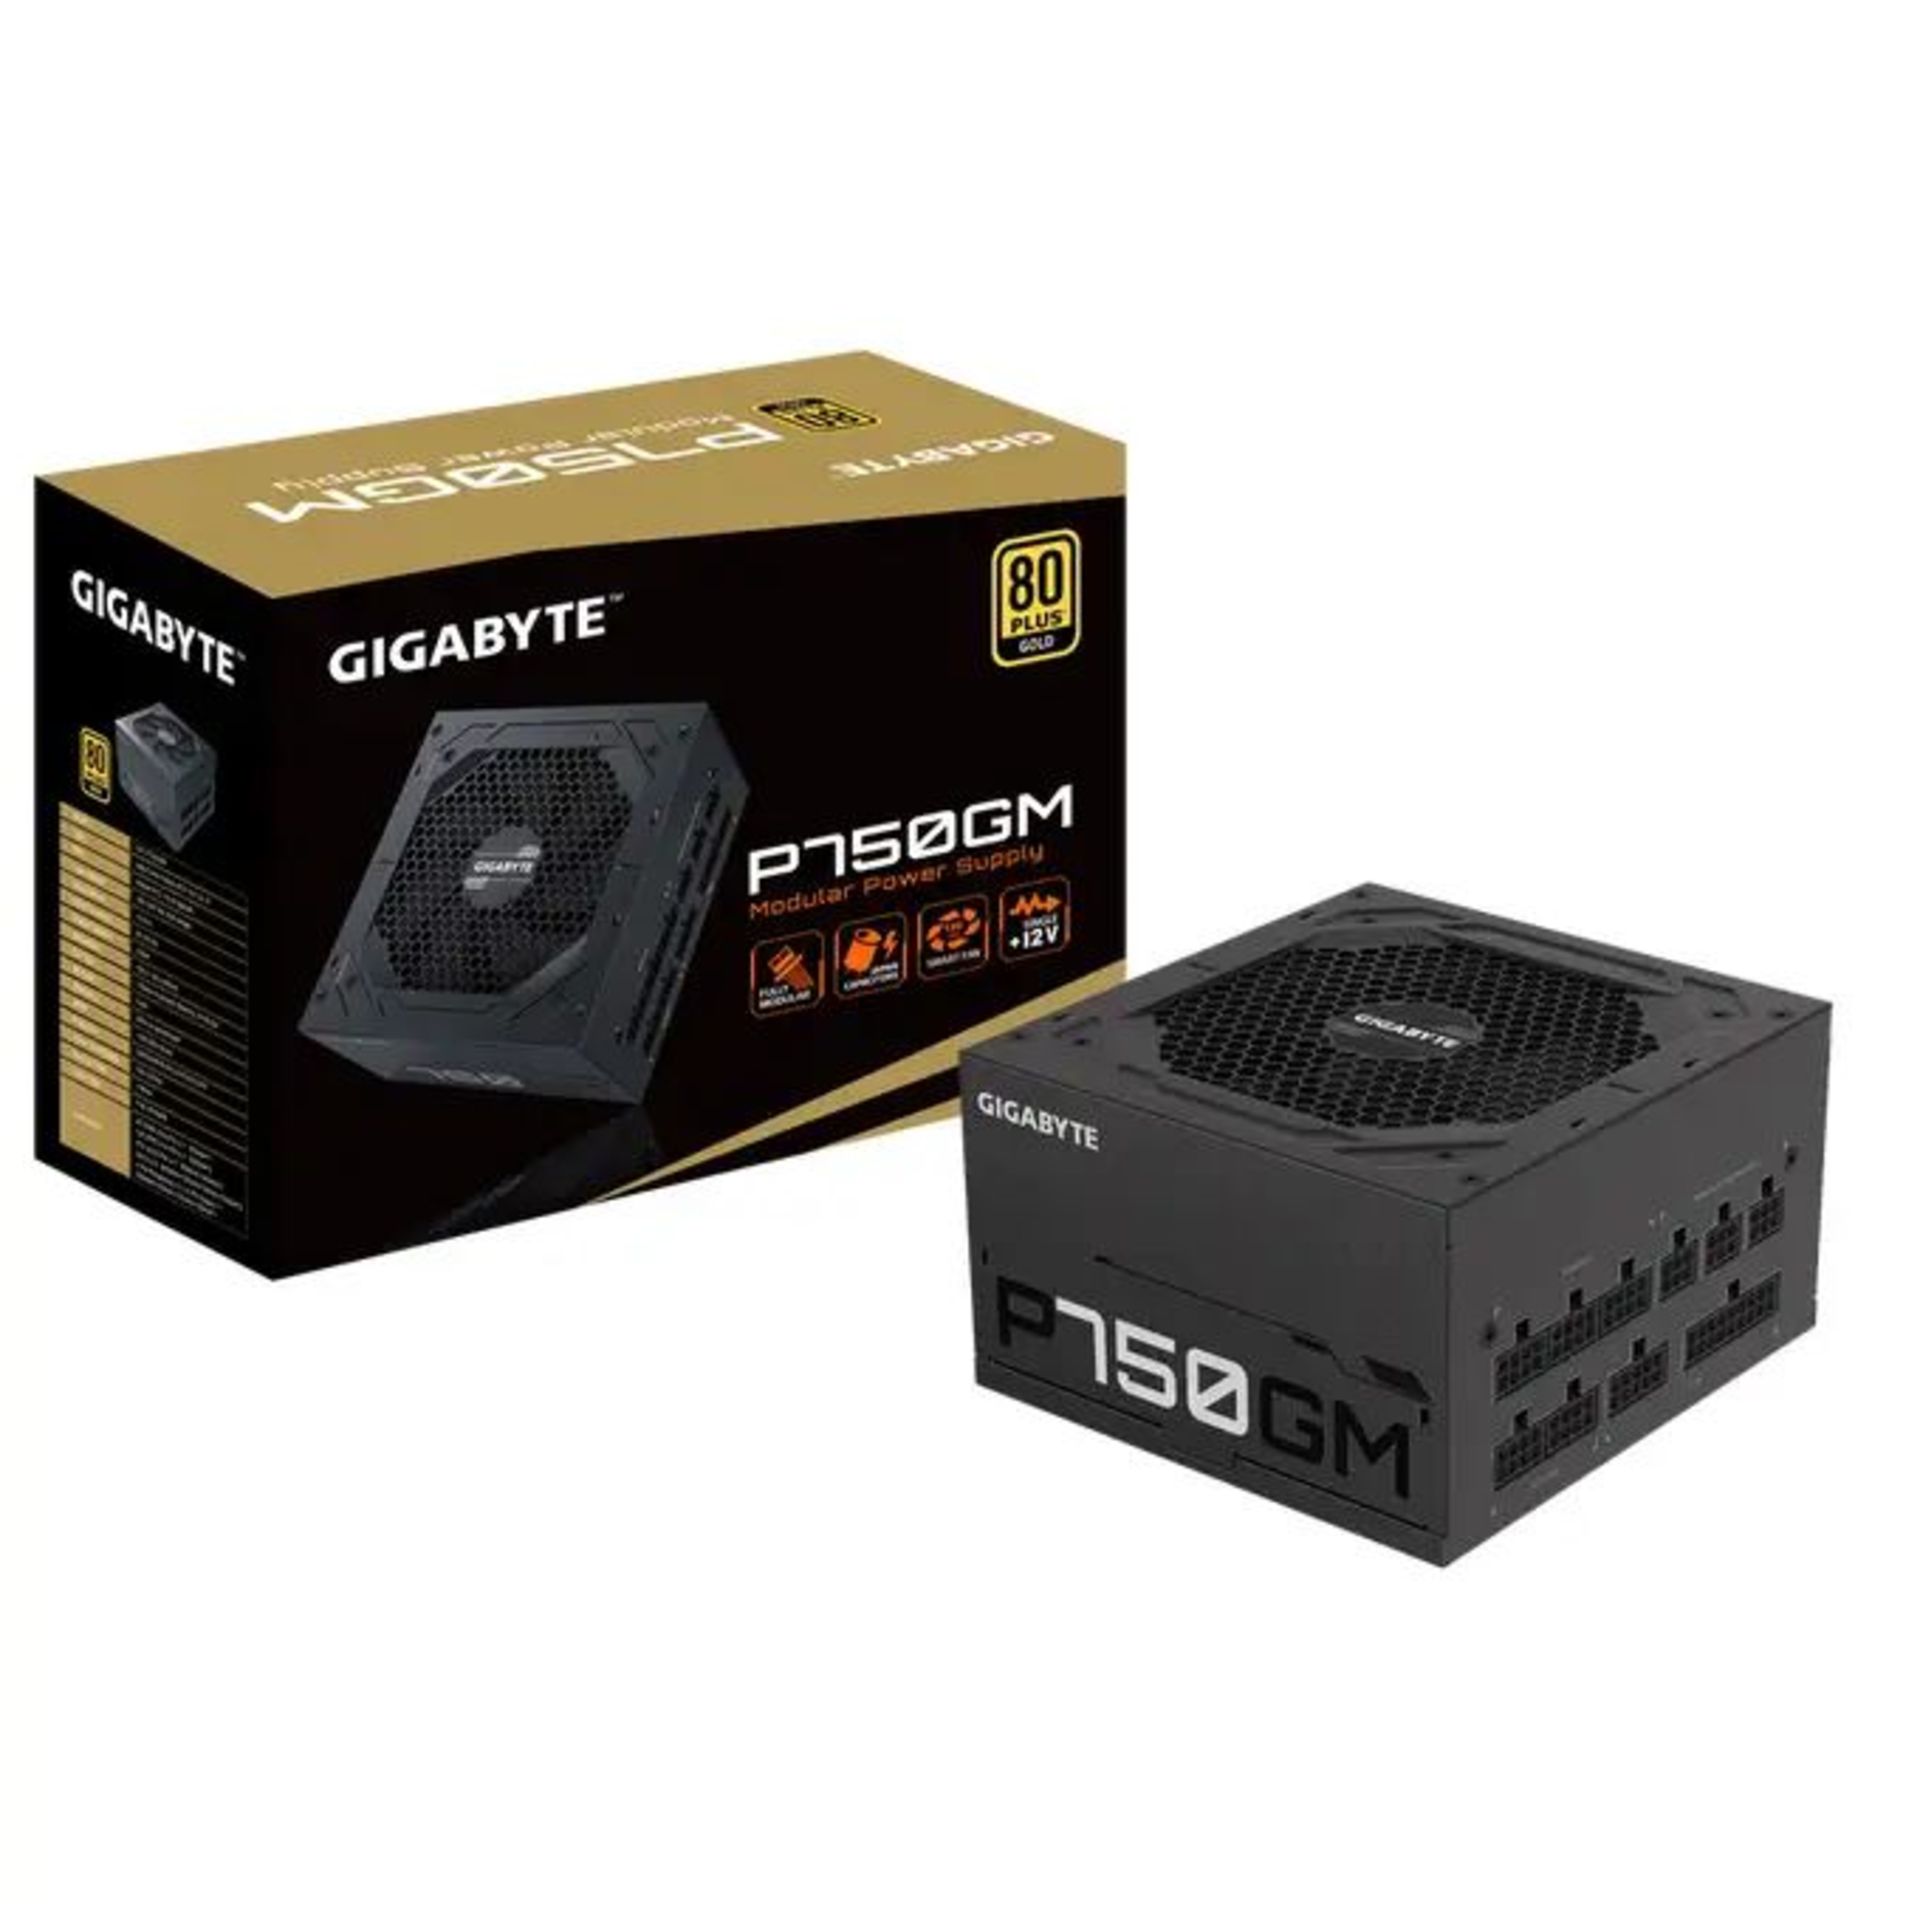 GIGABYTE P750GM 750w 80 Plus Gold Fully Modular Power Supply. - P2. Fortify the power of your system